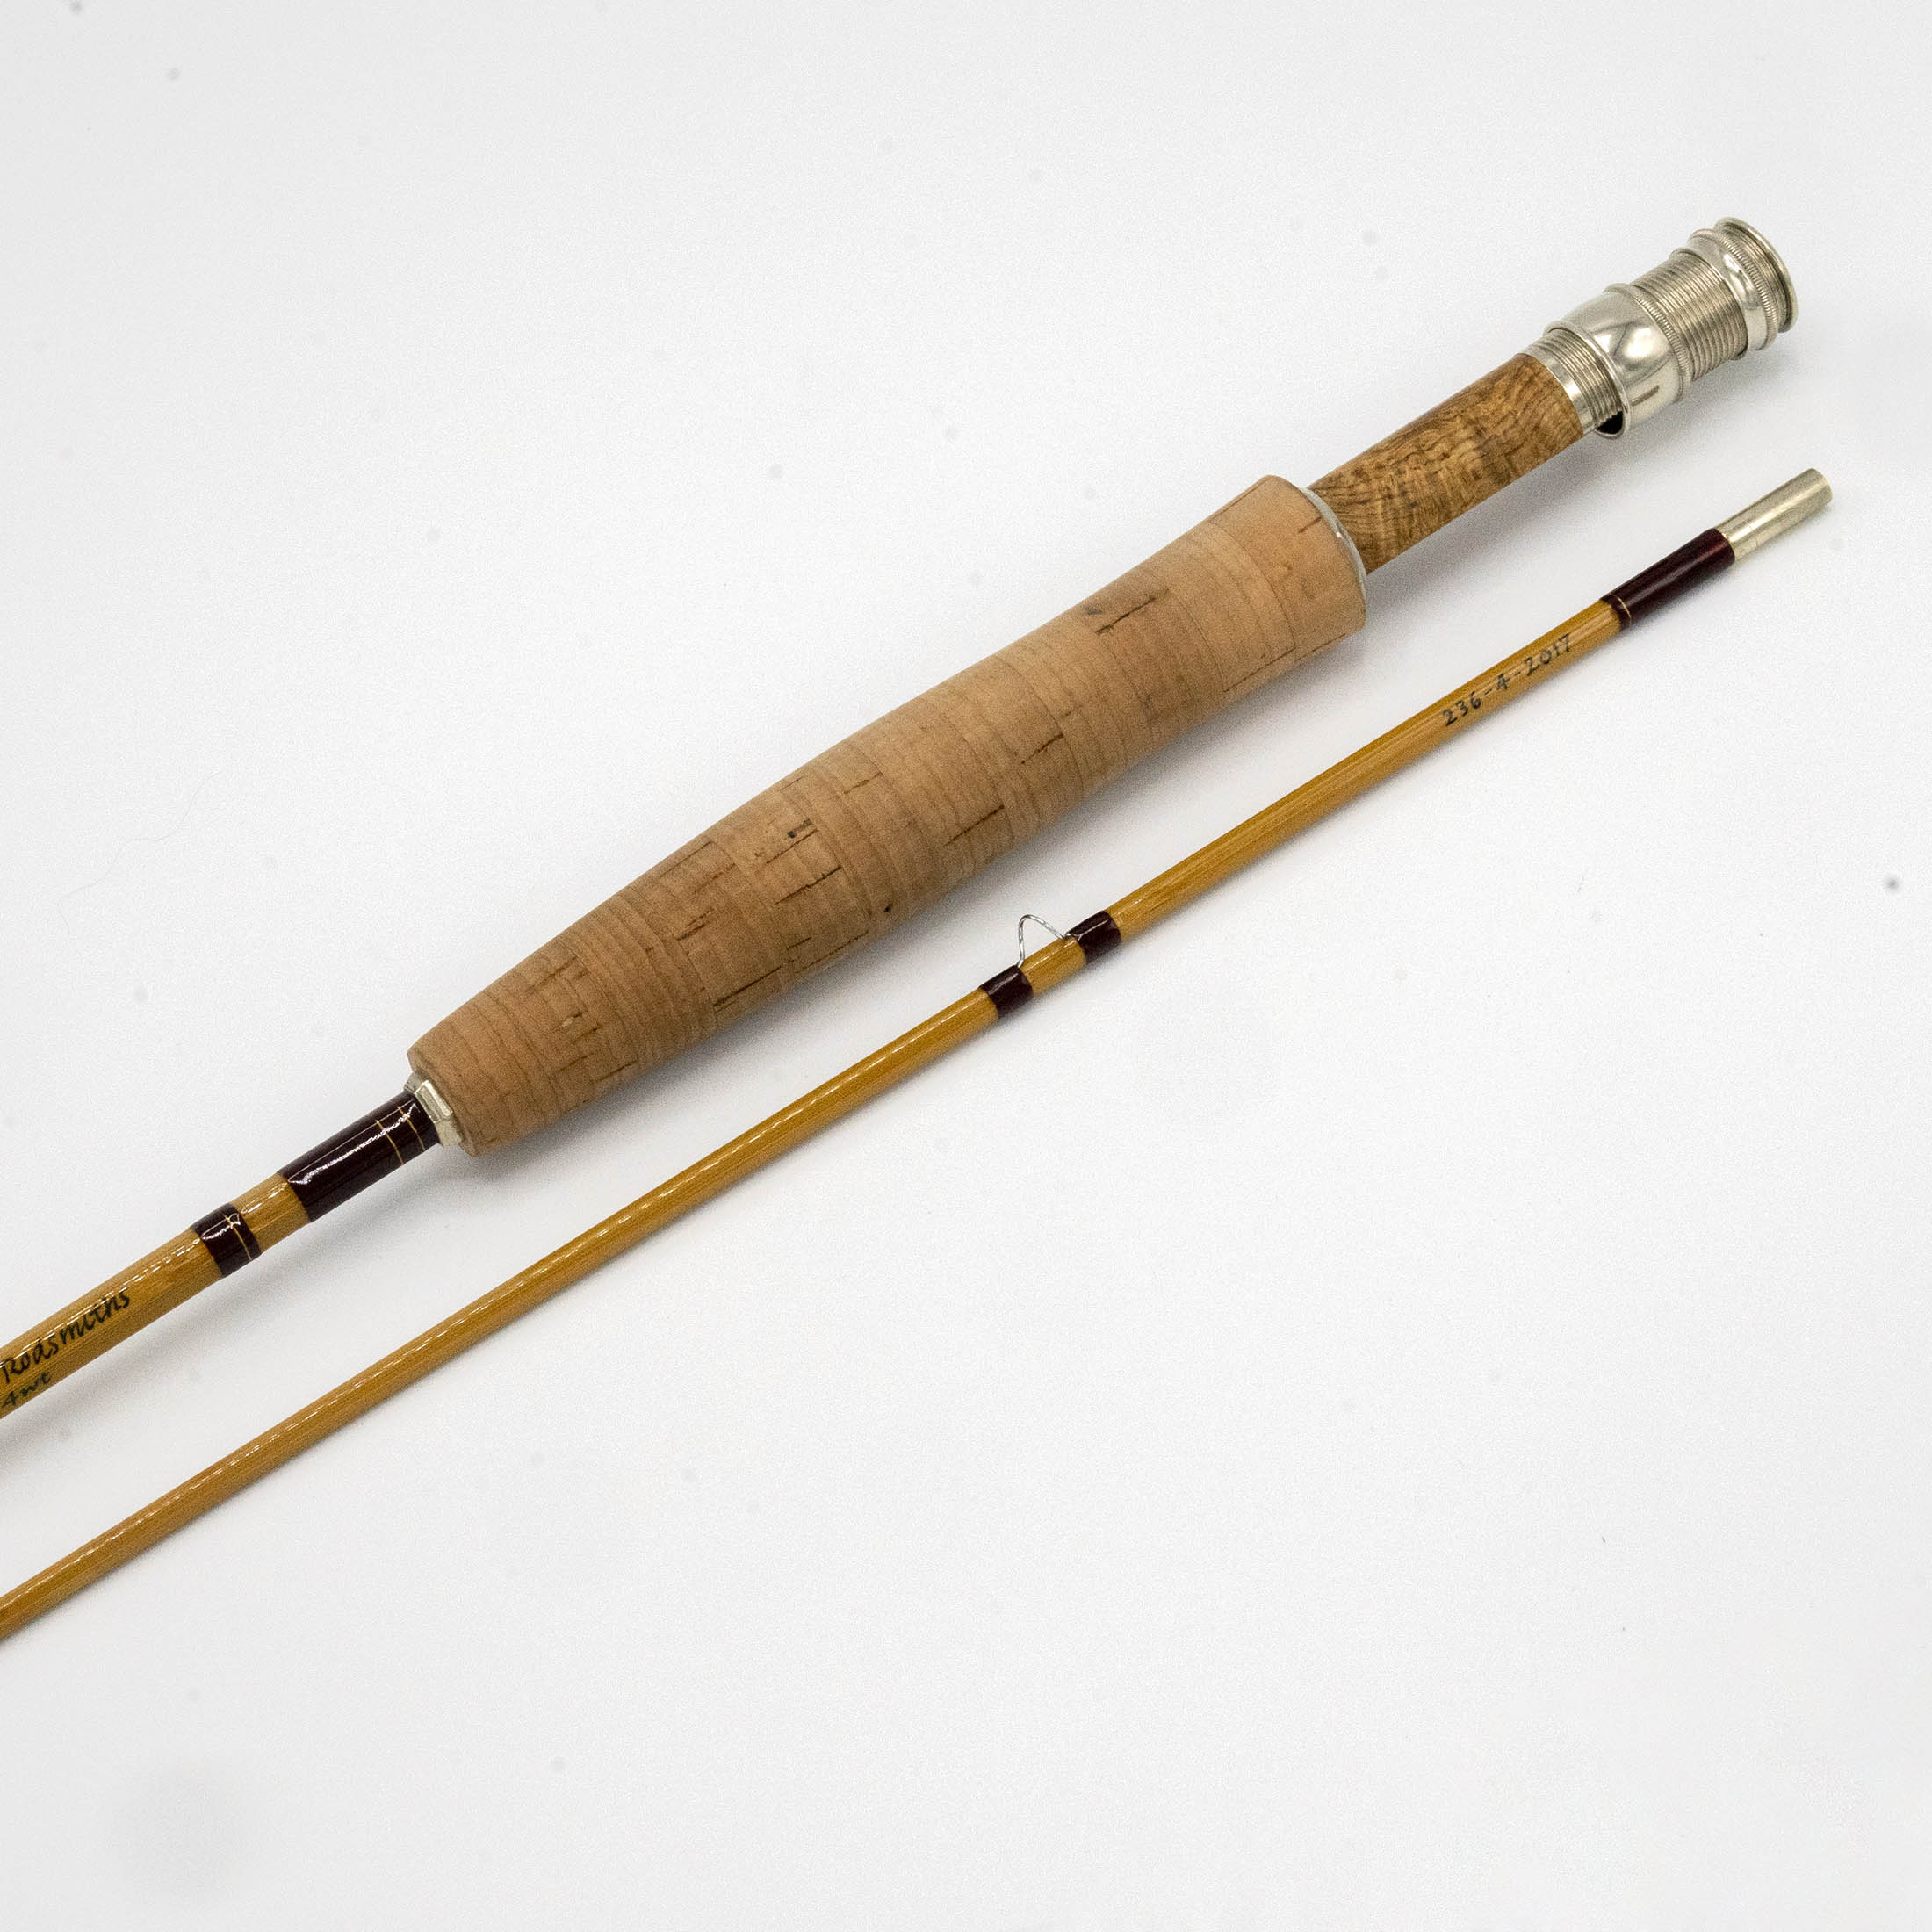 Bamboo Fishing Poles Can Bring You Even Closer to Nature - Bamboo